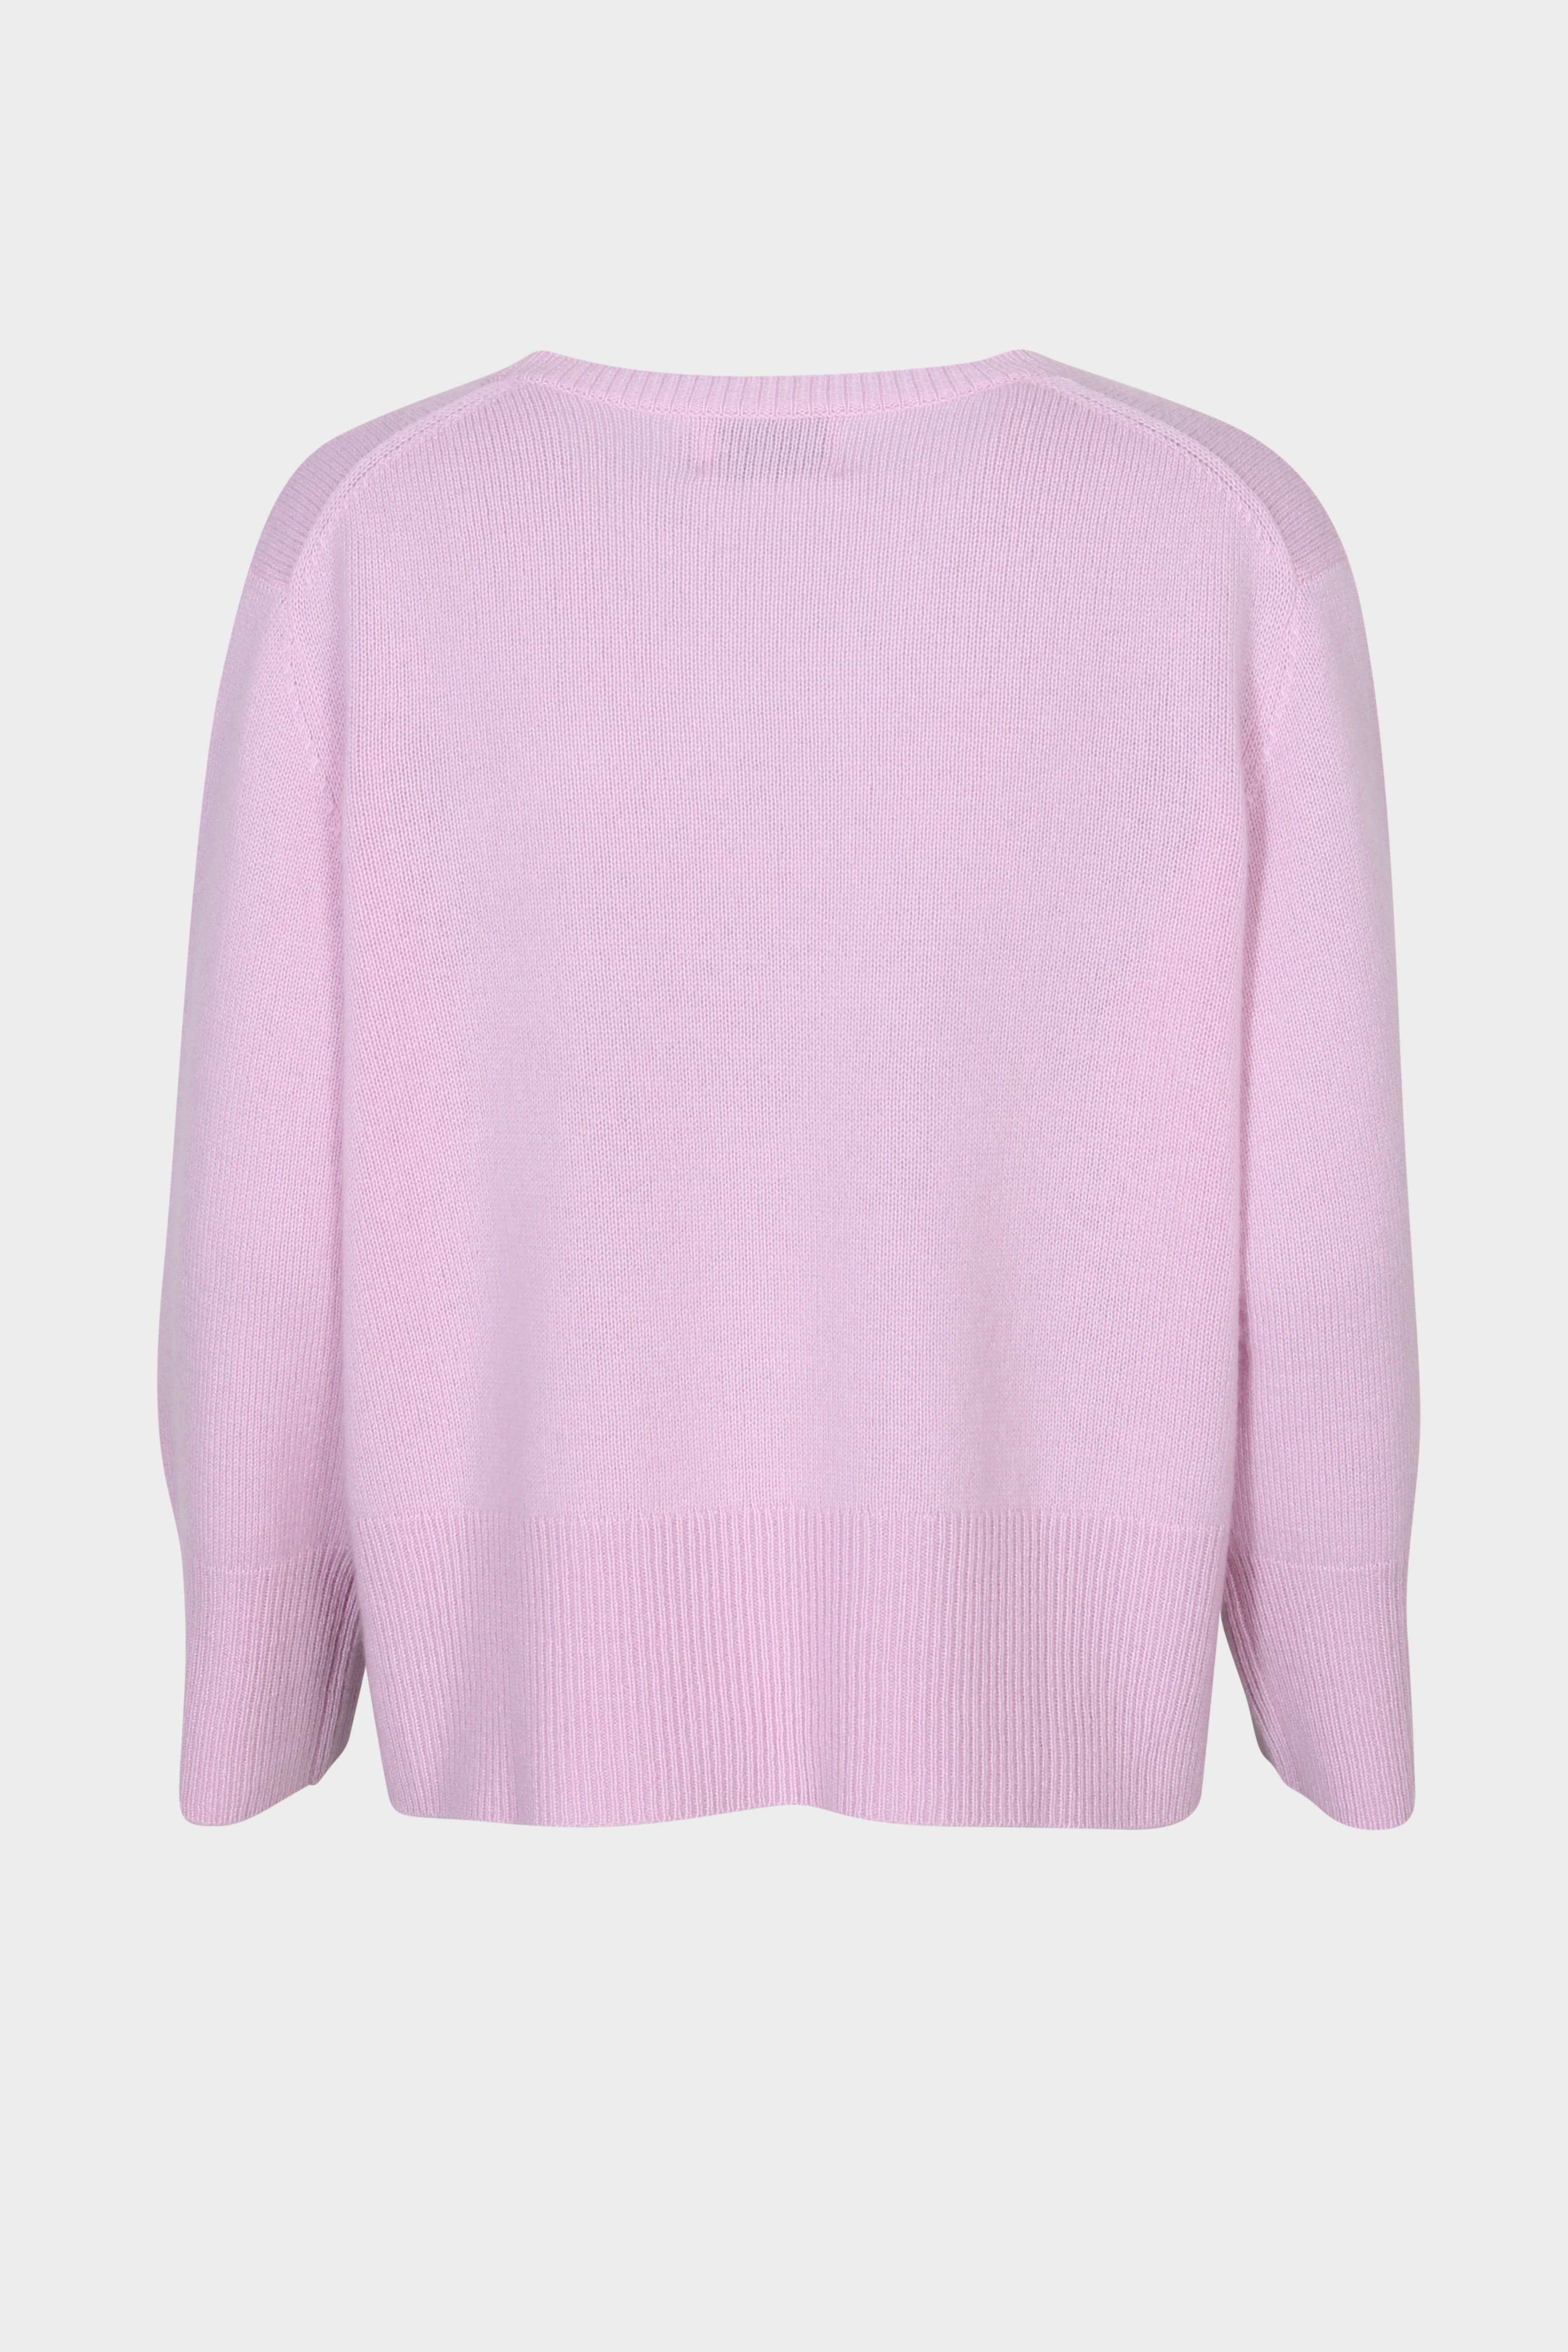 FLONA Cashmere Sweater in Pink M